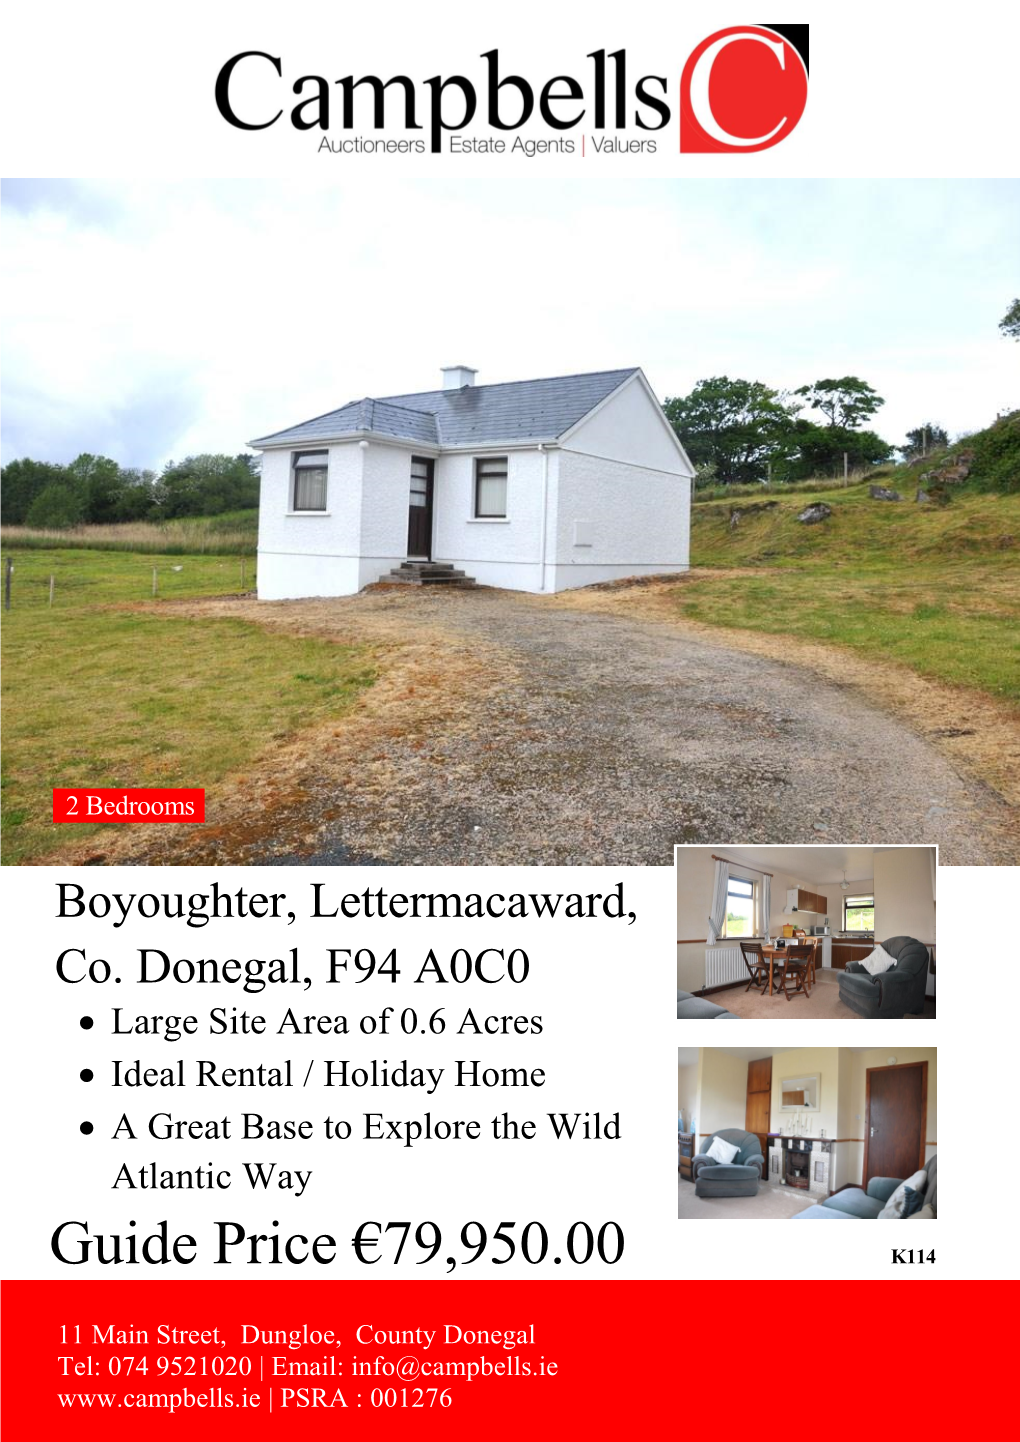 Boyoughter, Lettermacaward, Co. Donegal, F94 A0C0